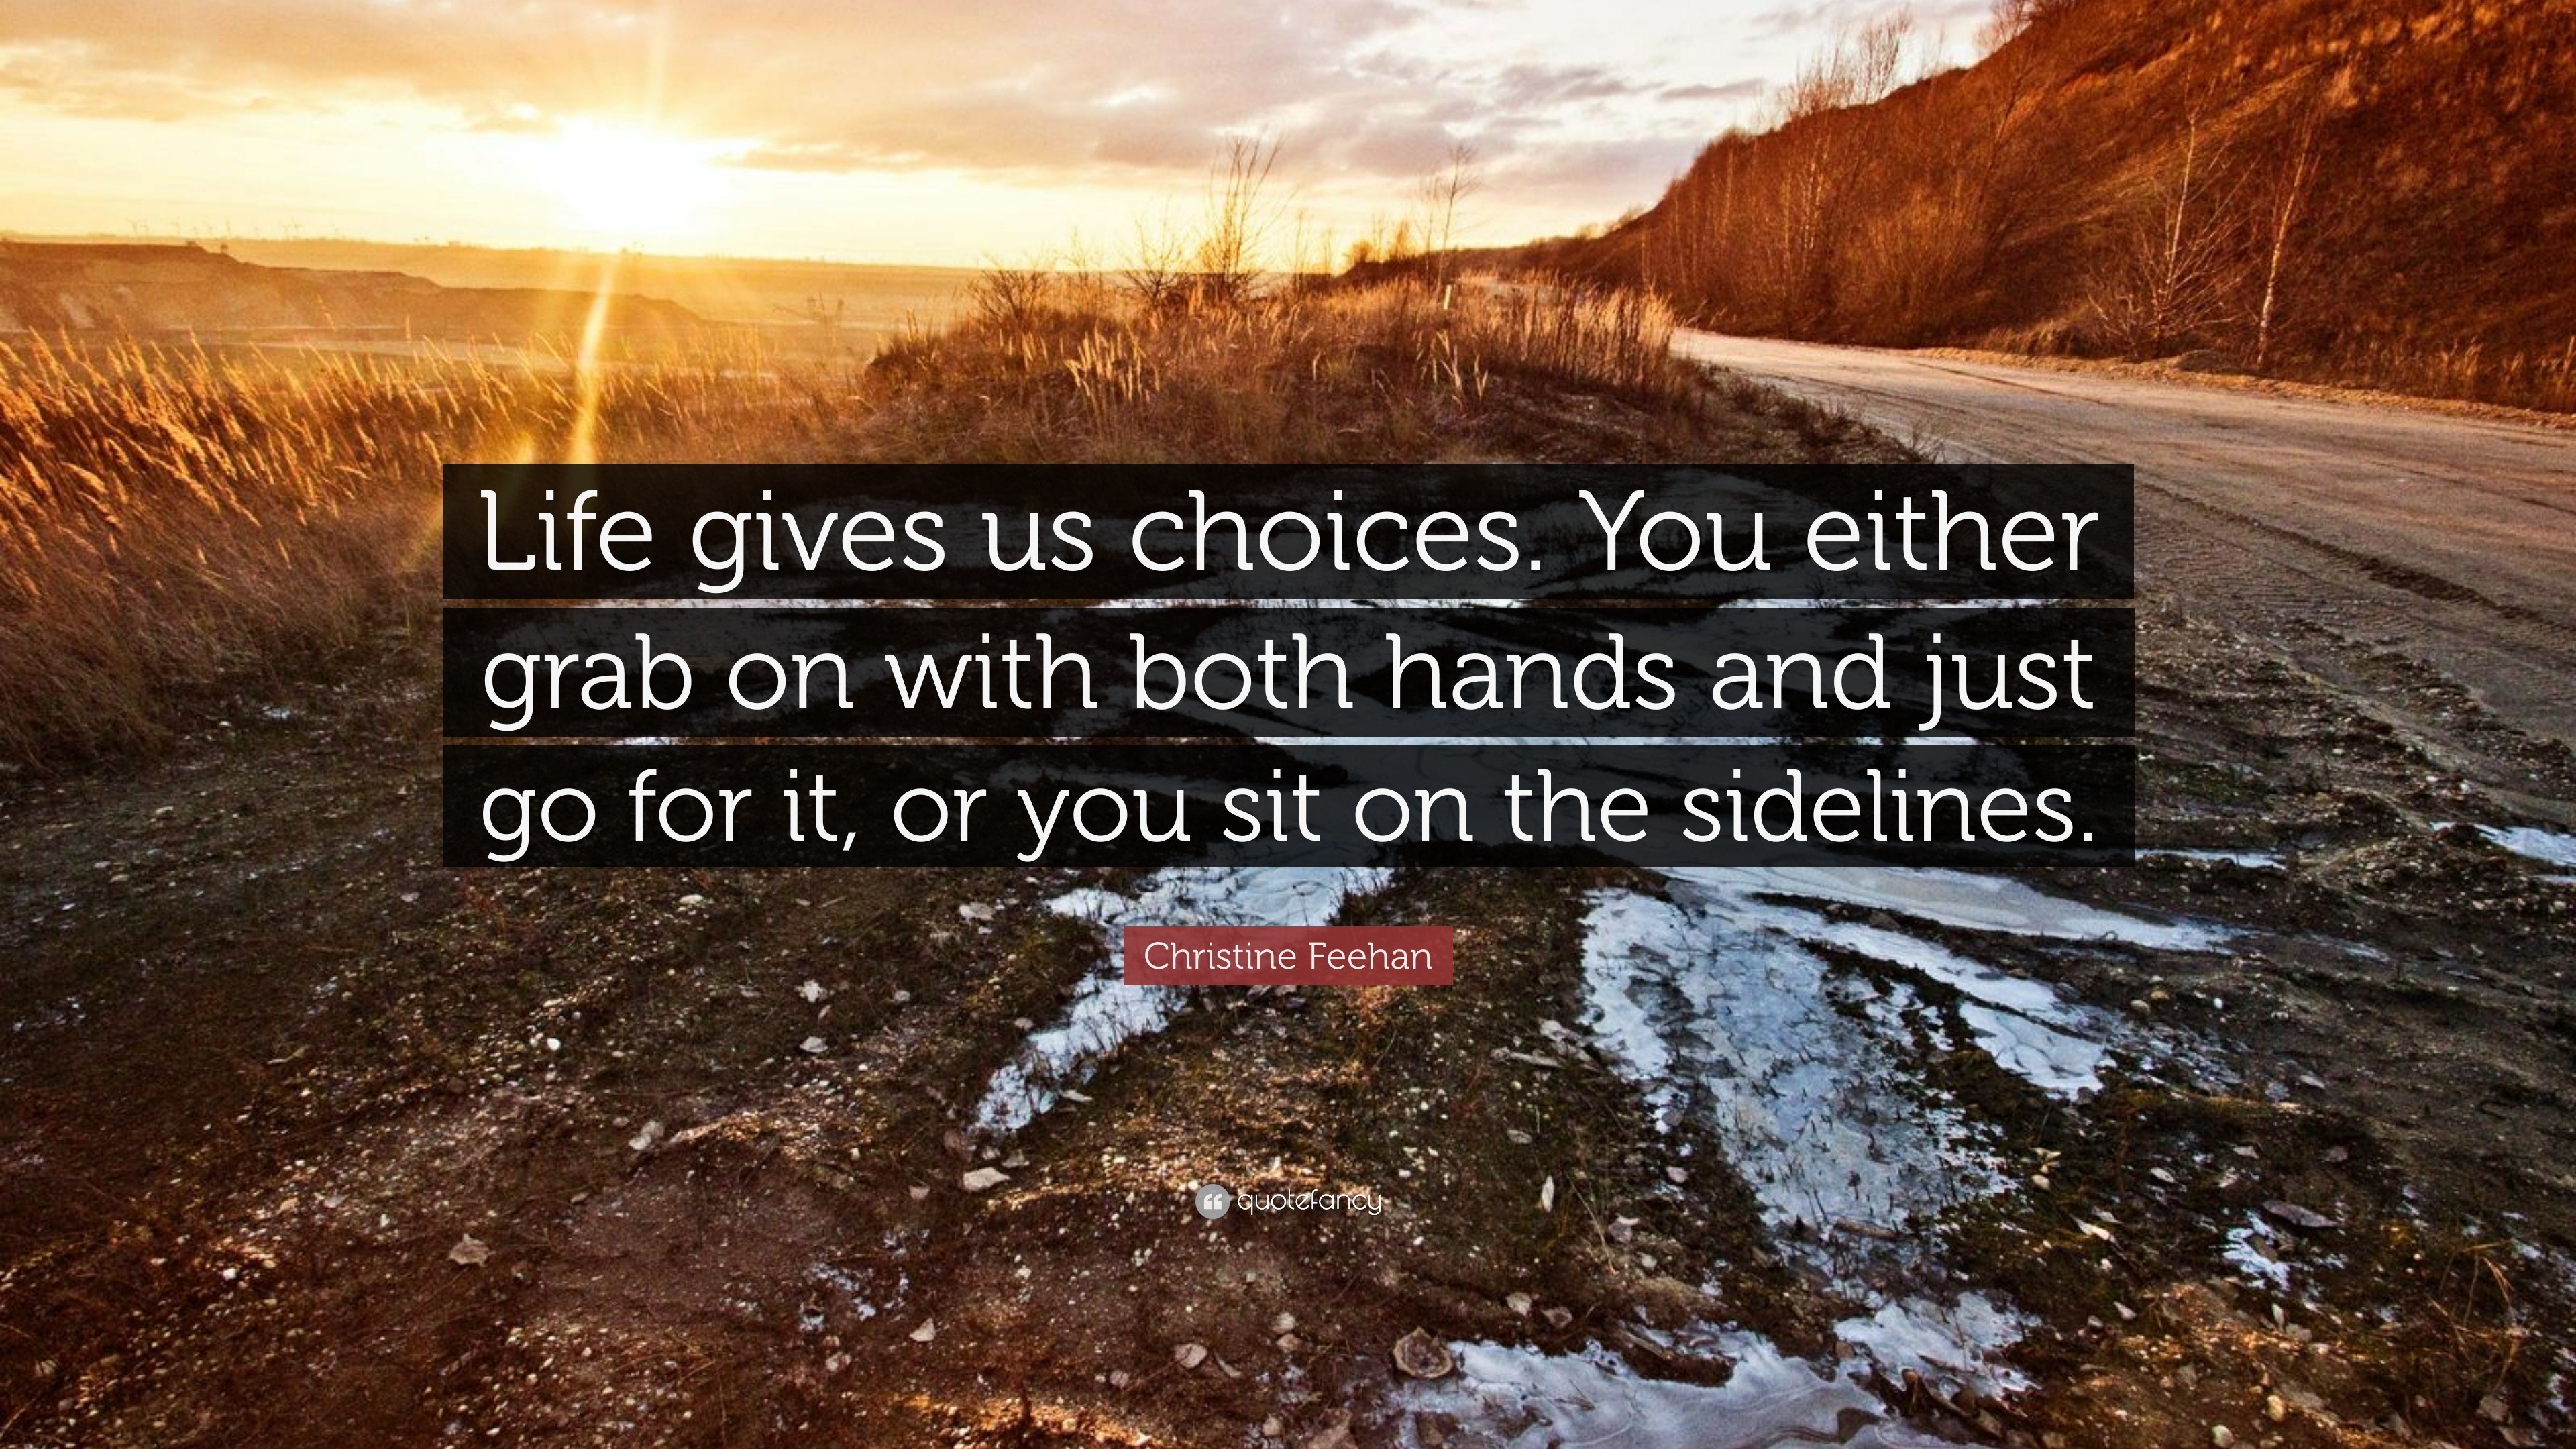 Christine Feehan Quote “Life gives us choices You either grab on with both